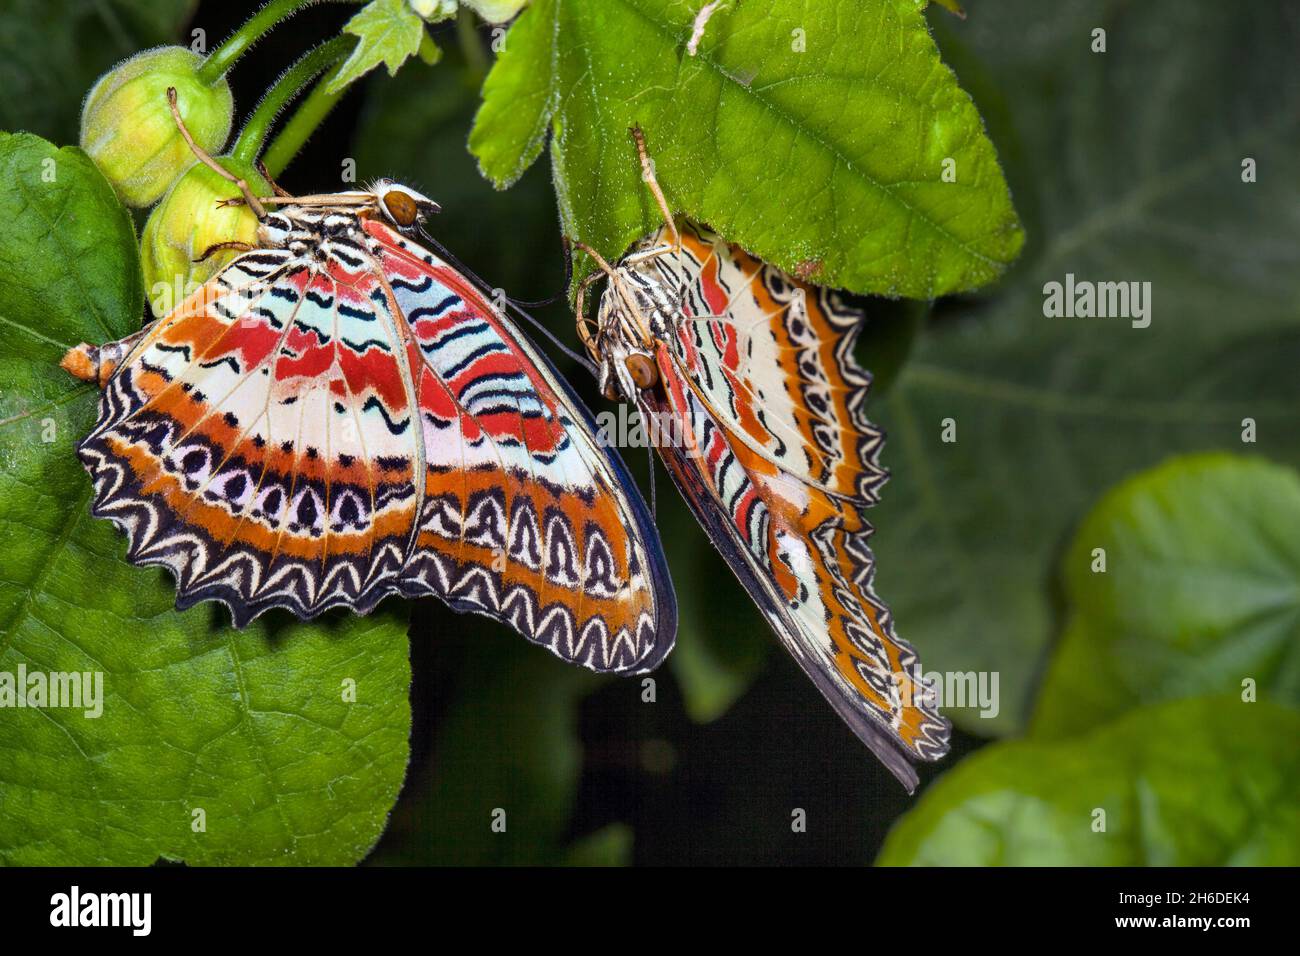 red lacewing (Cethosia biblis, Papilio biblis), two red lacewings on a leaf Stock Photo